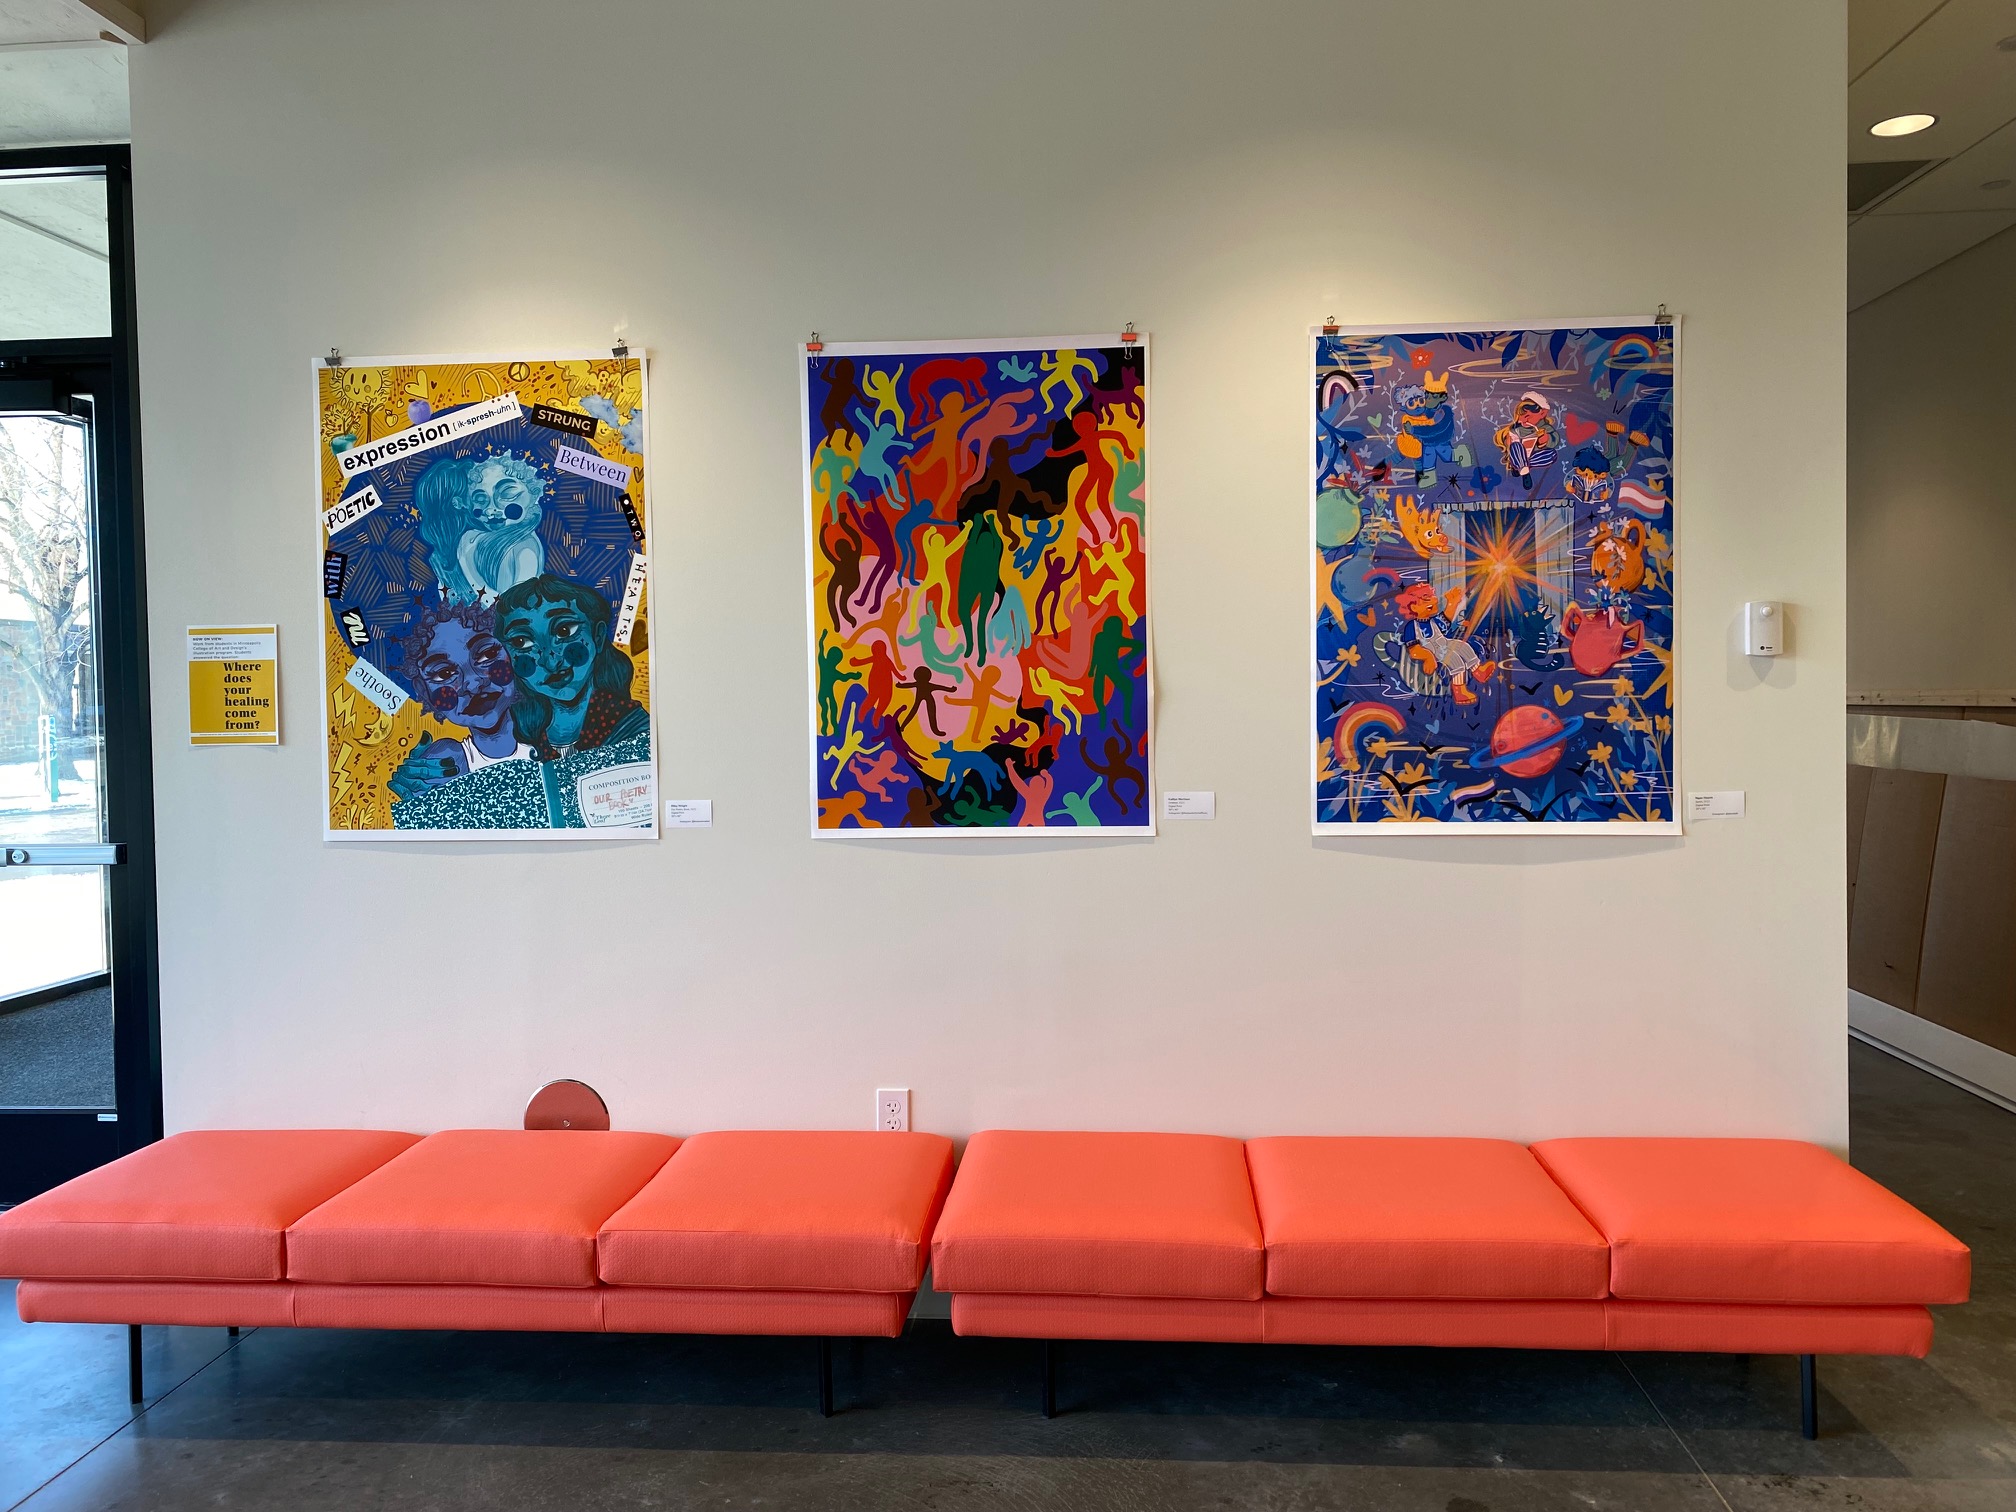 Family Tree Clinic Entrance Featuring Artworks by Riley Wright, Kaitlyn Morrsion, and Ngan Huynh